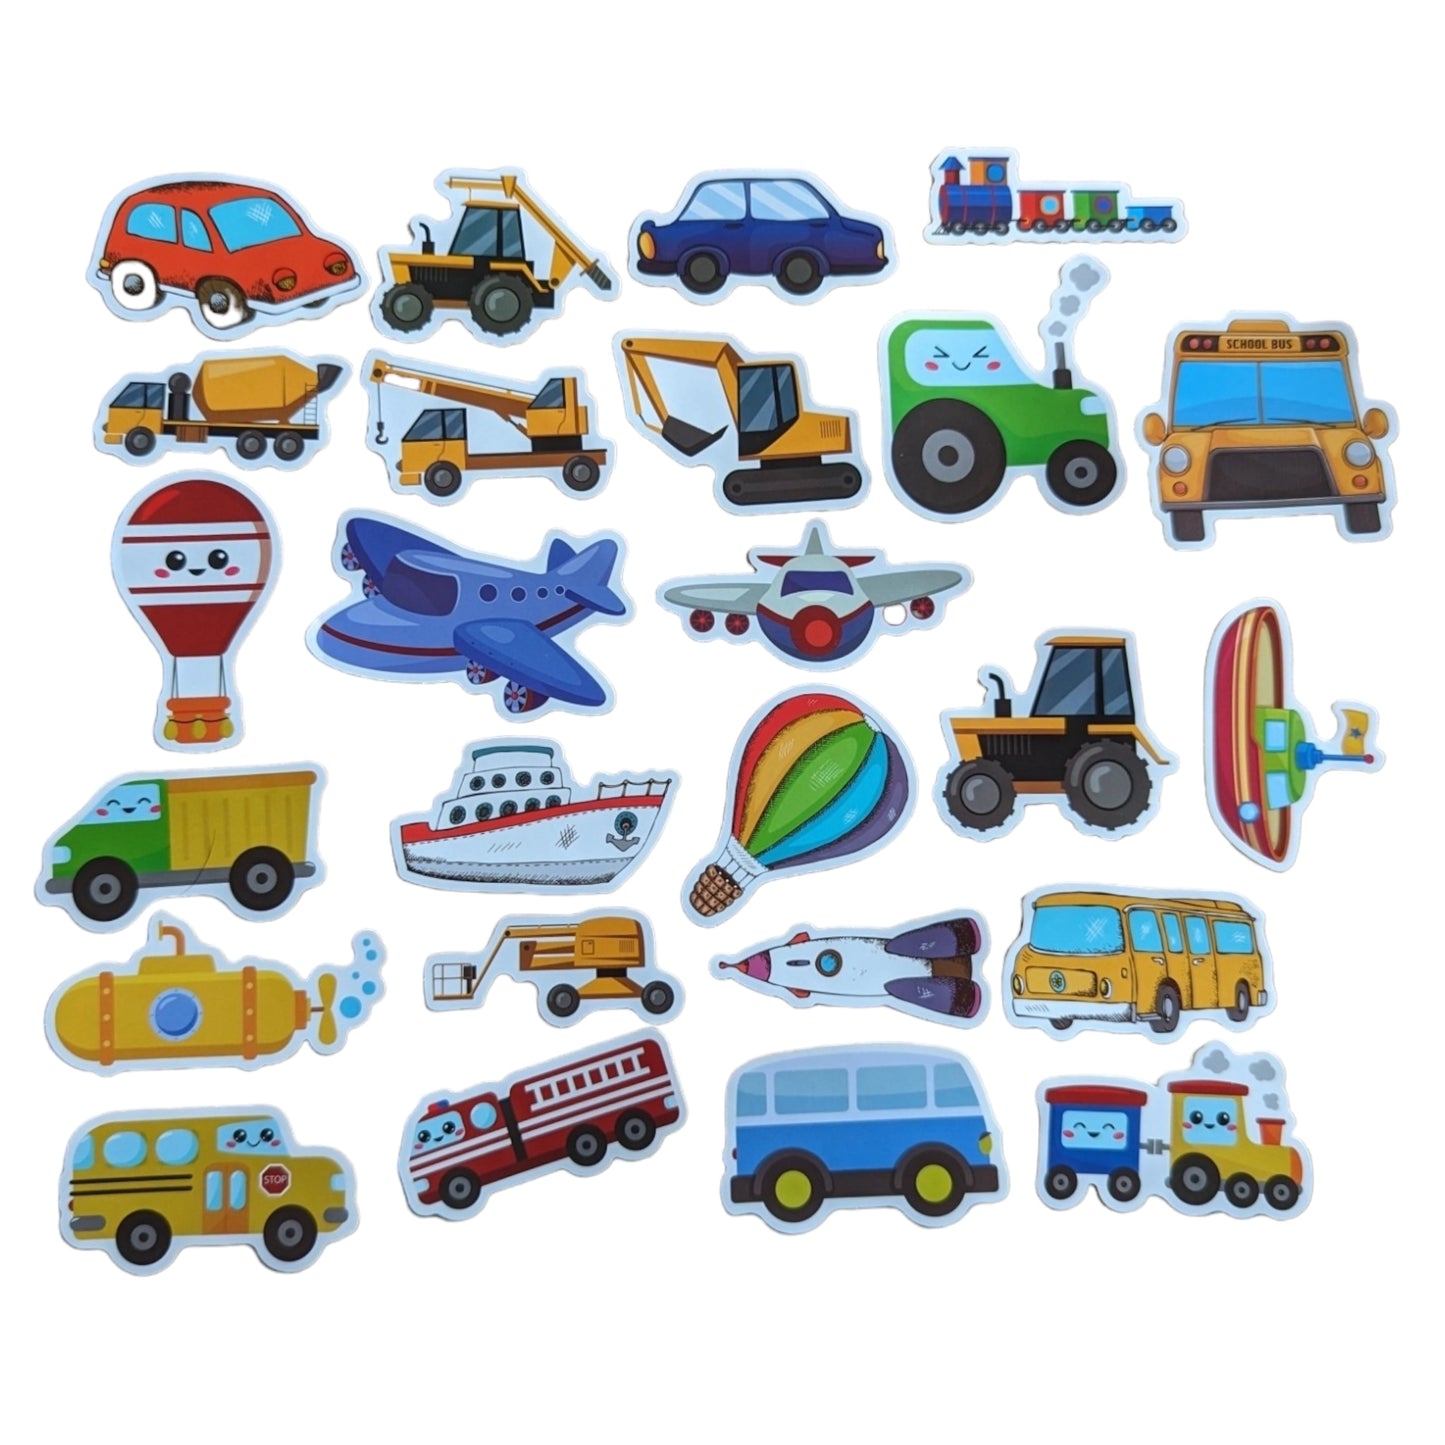 STICKER PACK - Pack #14 - 25 Pieces - Transportation